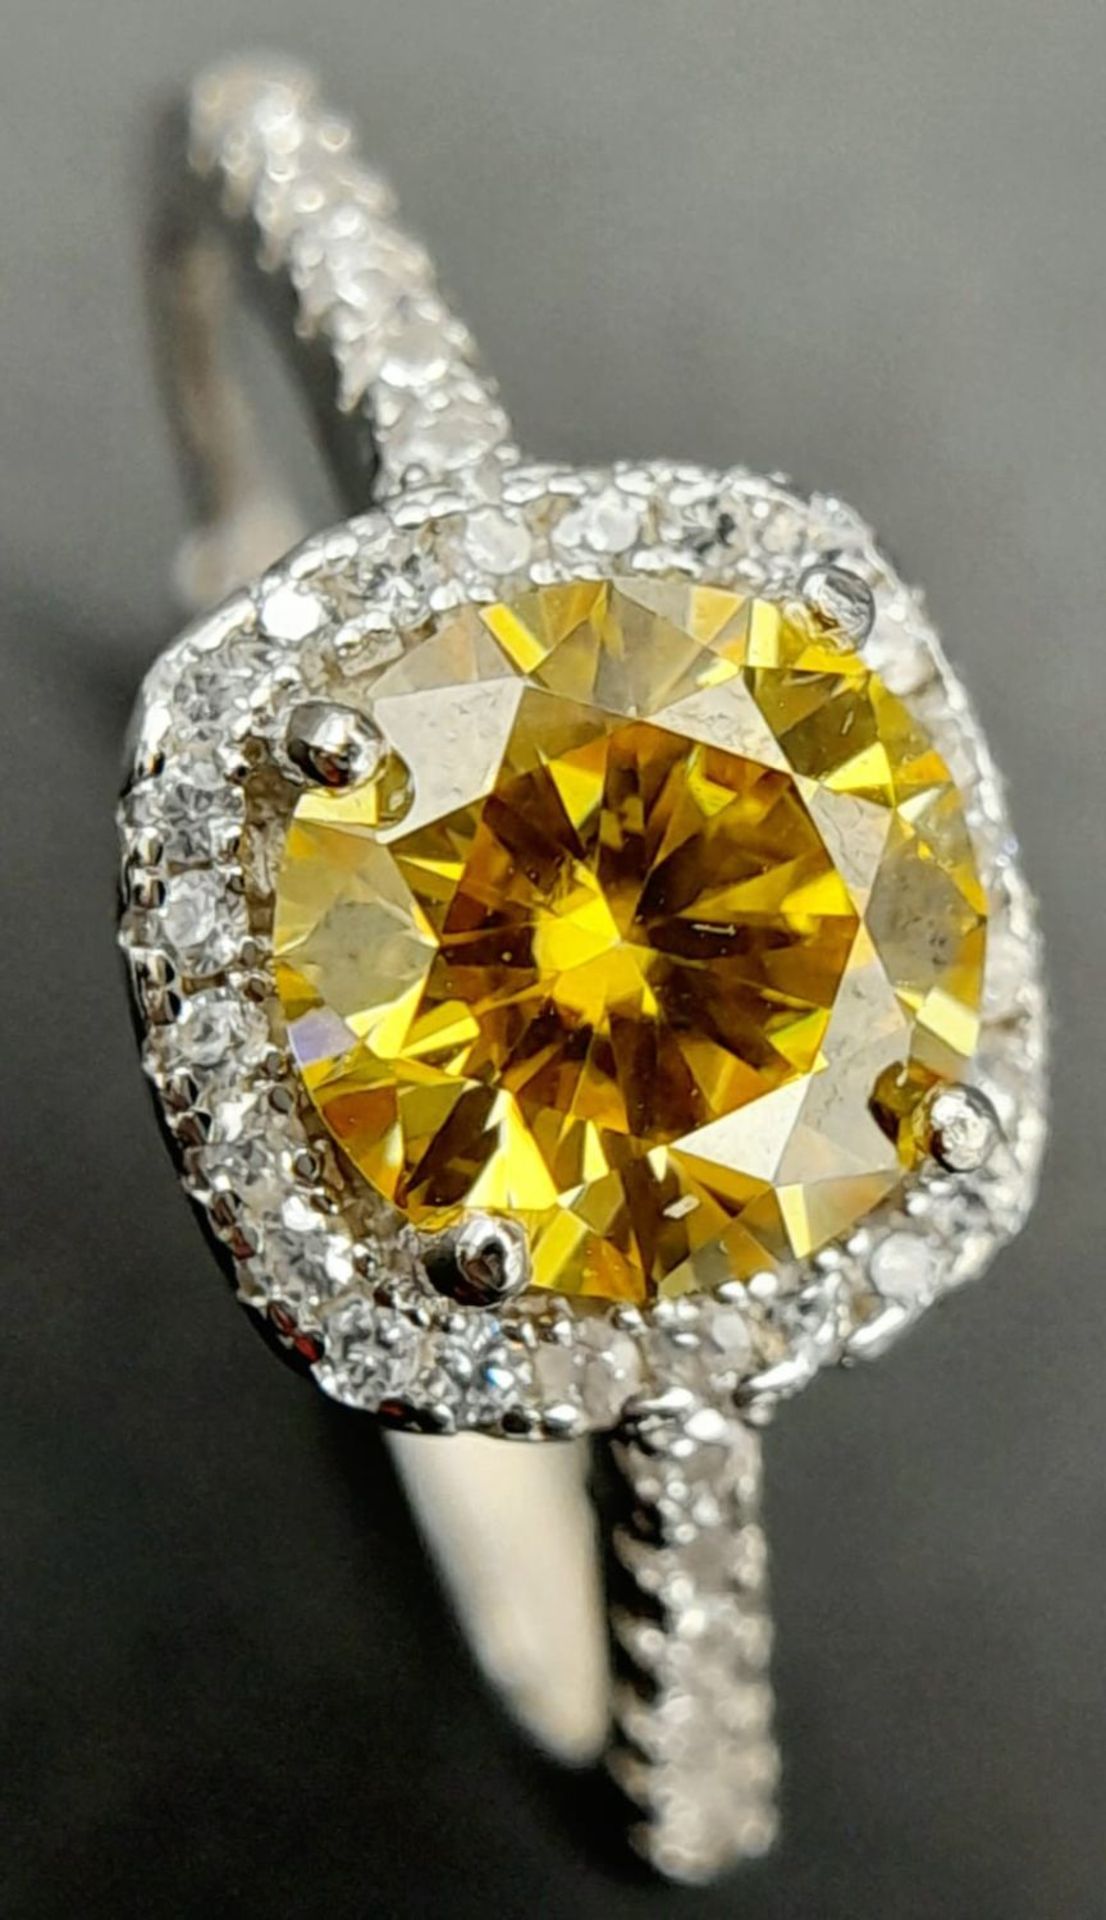 A 1ct Golden Yellow Moissanite Ring. VVS1 Grade. Comes with a GRA certificate. Size N. - Image 3 of 6